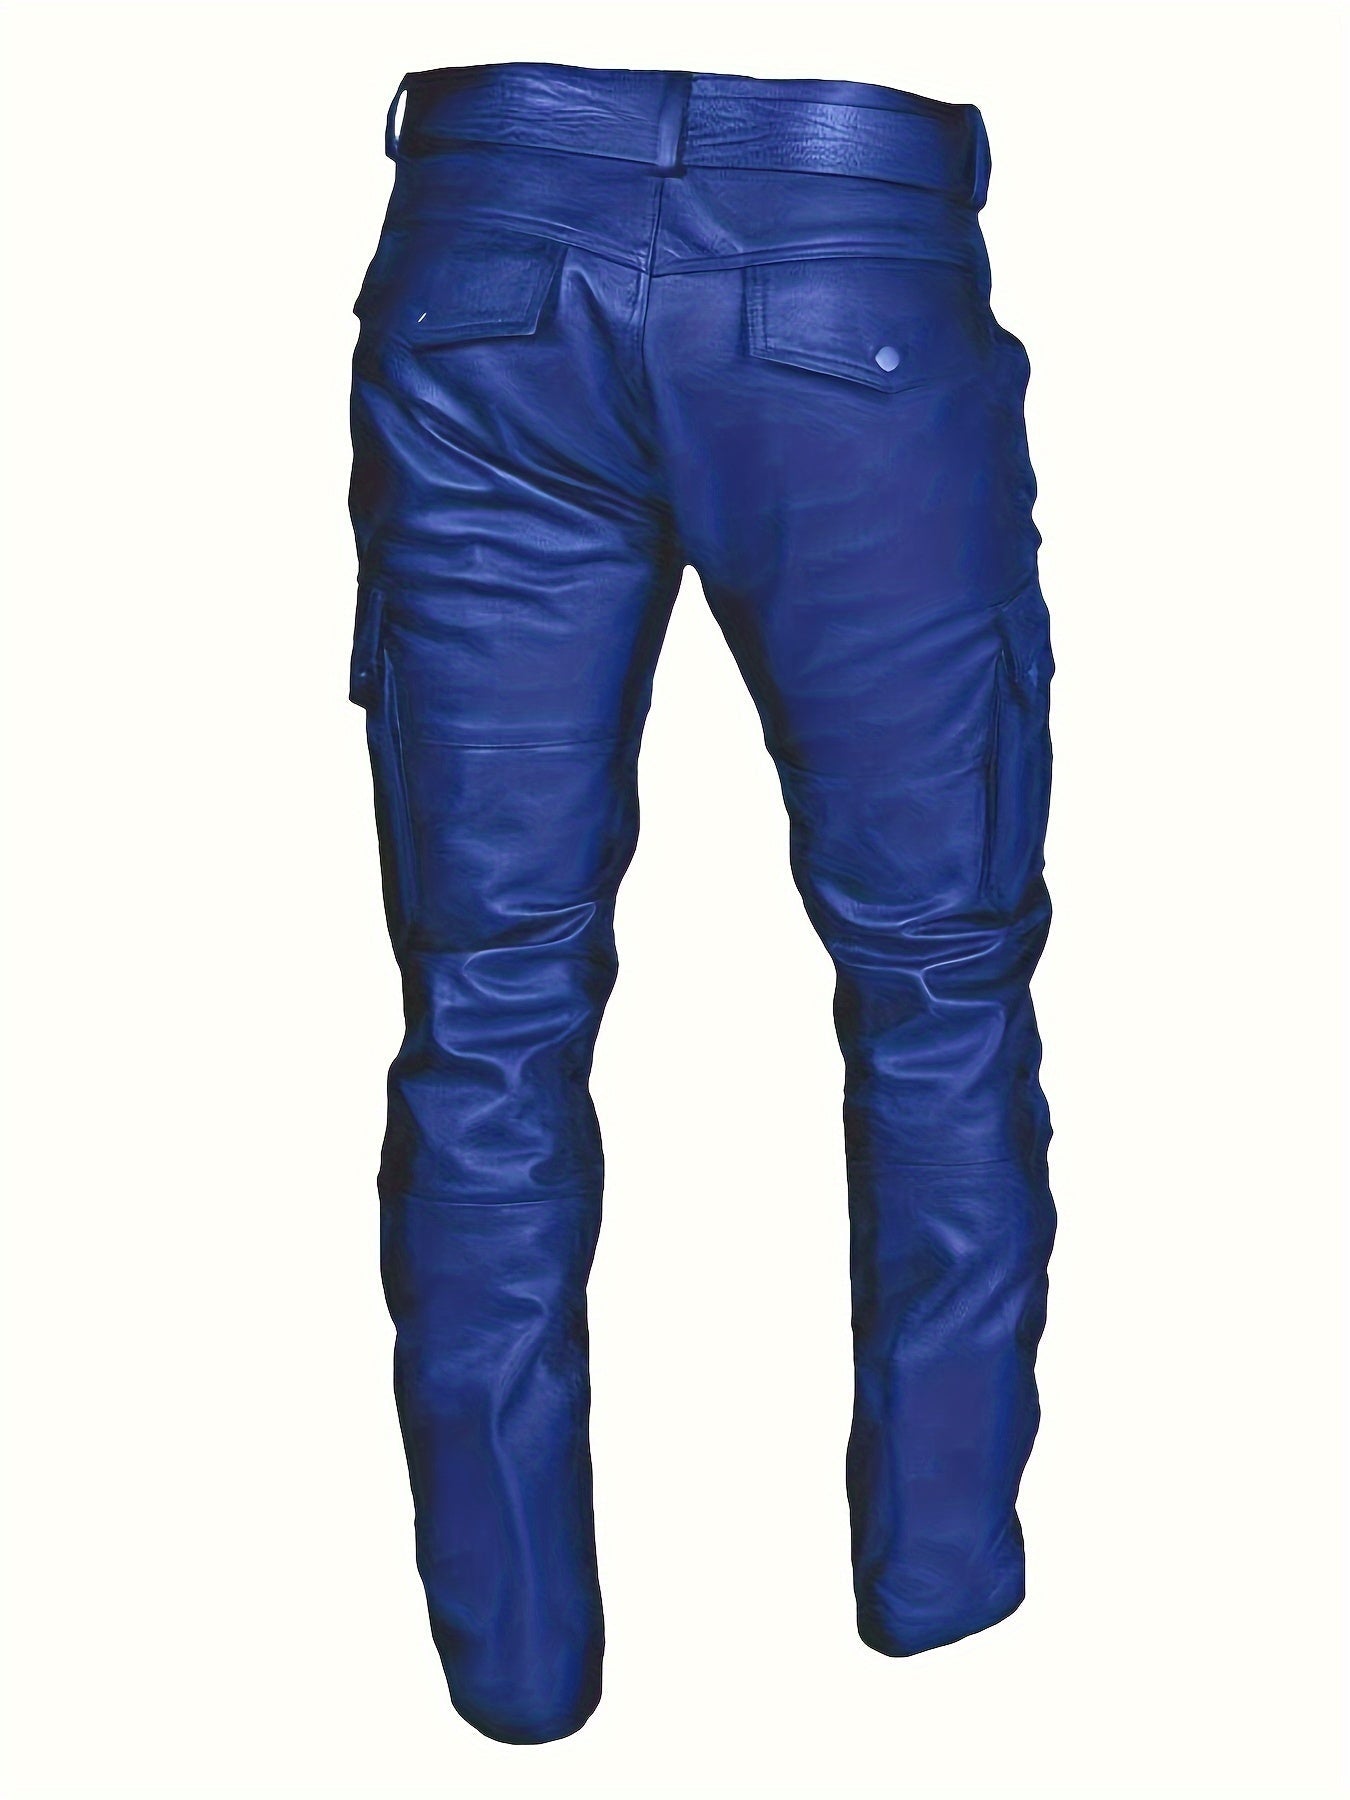 Upgrade Your Seasonal Style with Men's Leather Pants for Autumn and Winter - CasualFlowshop